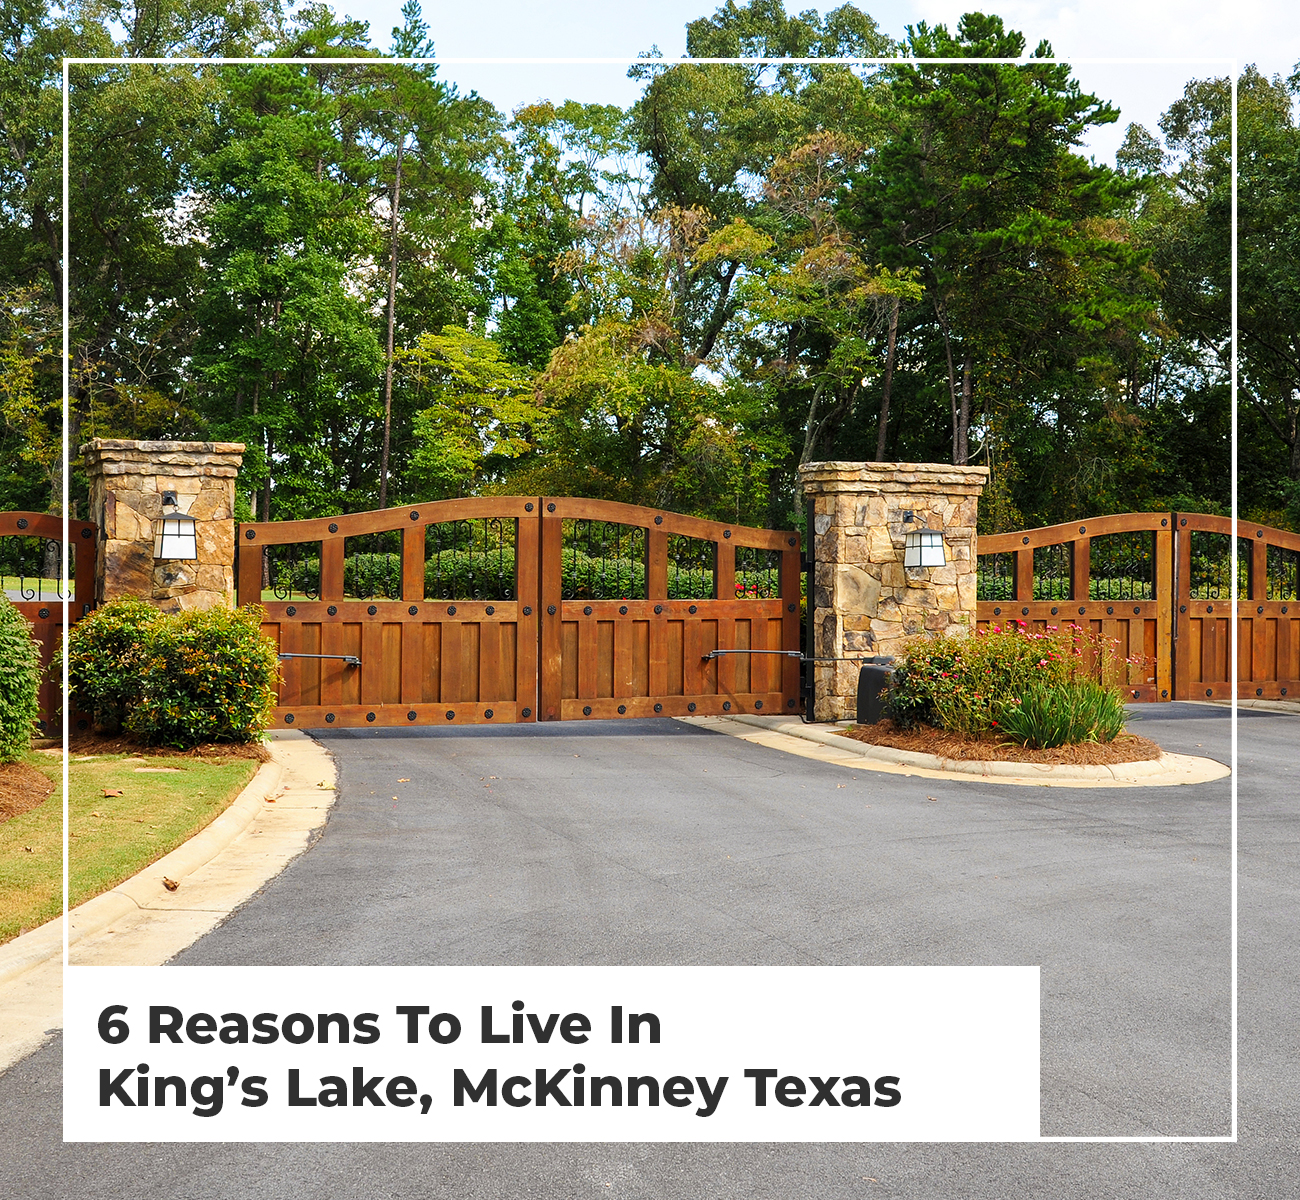 6 Reasons To Live In King’s Lake, McKinney Texas